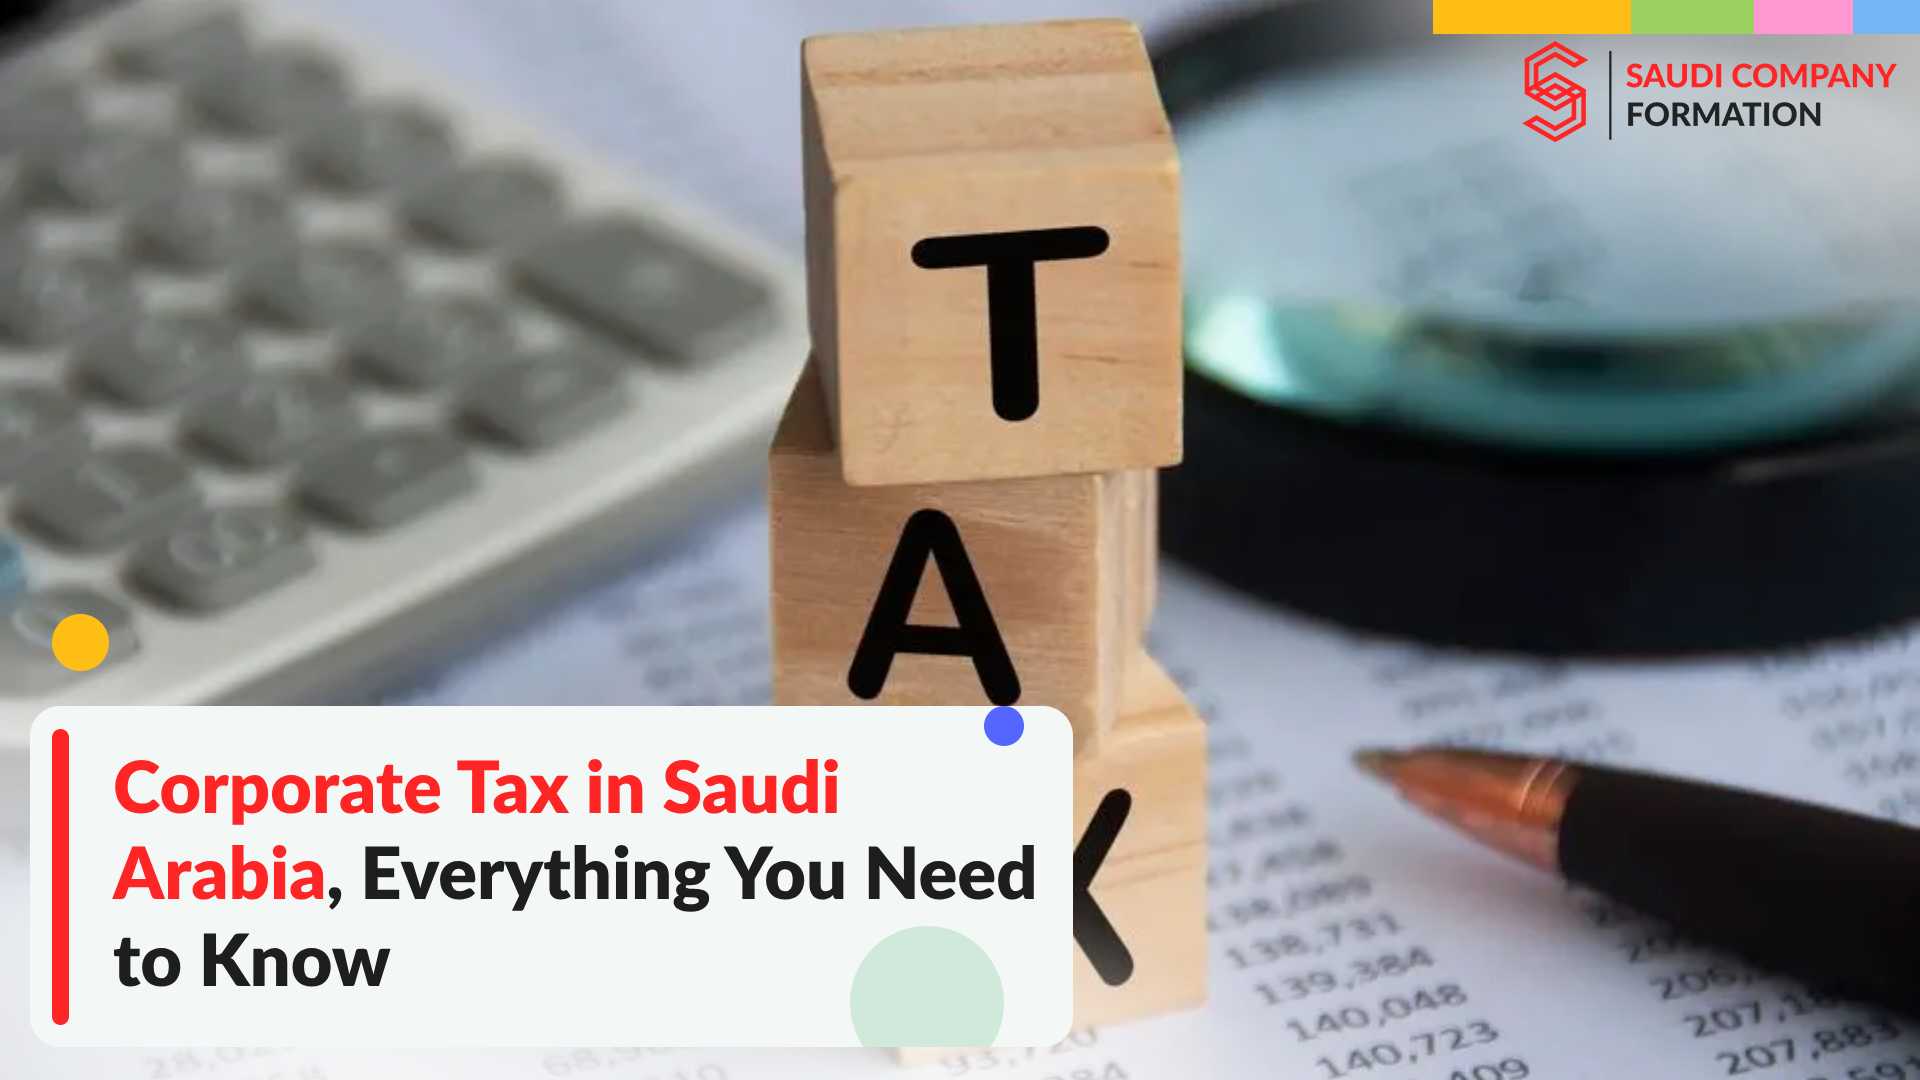 Corporate Tax in Saudi Arabia, Everything You Need to Know